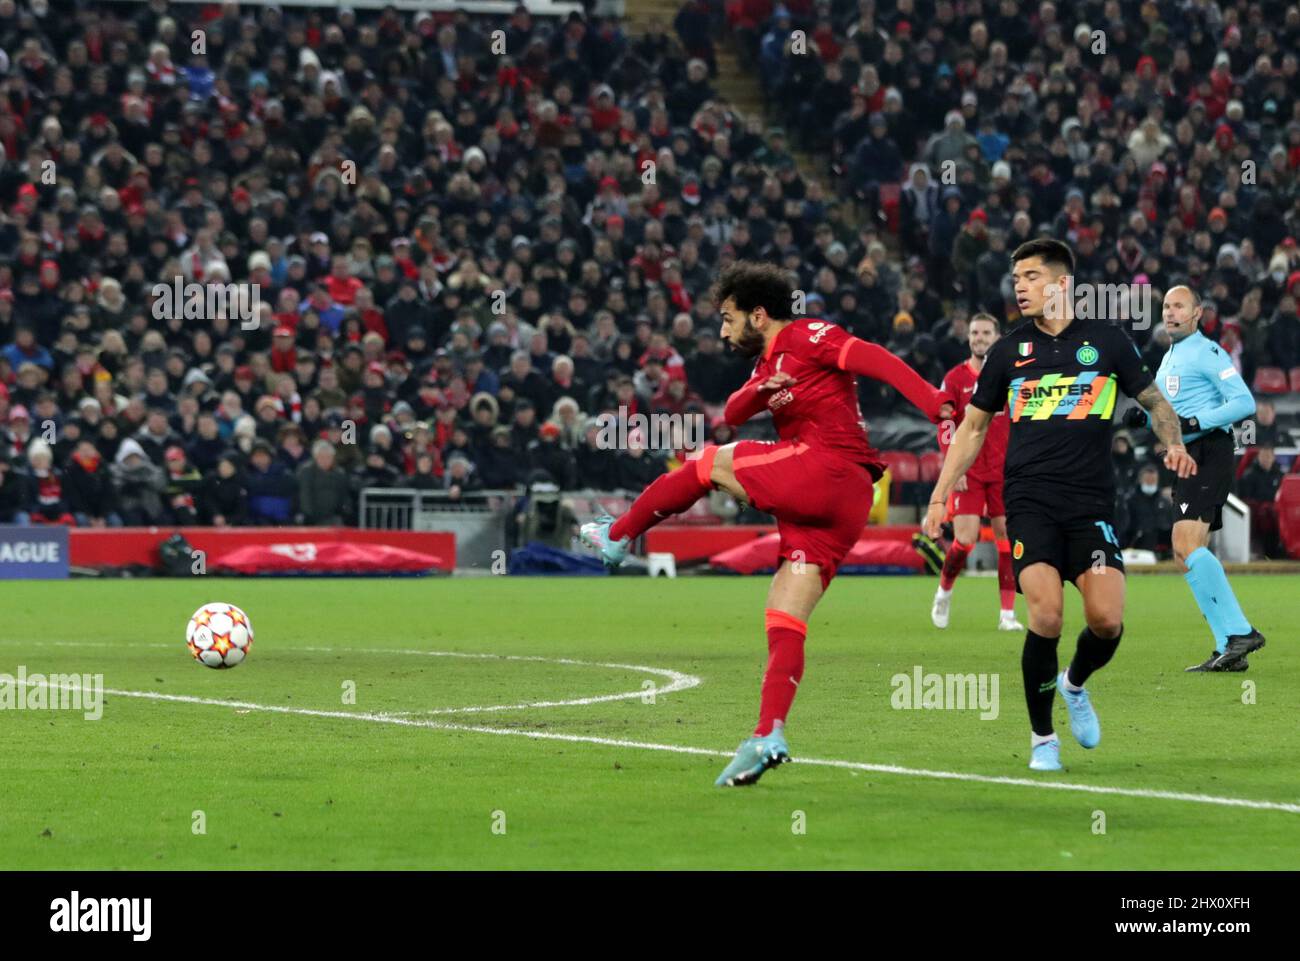 8th March 2022 ; Anfield, Liverpool, England; Champions League football, Liverpool versus Inter Milan : Mohammed Salah of Liverpool  volleys a shot at goal Stock Photo